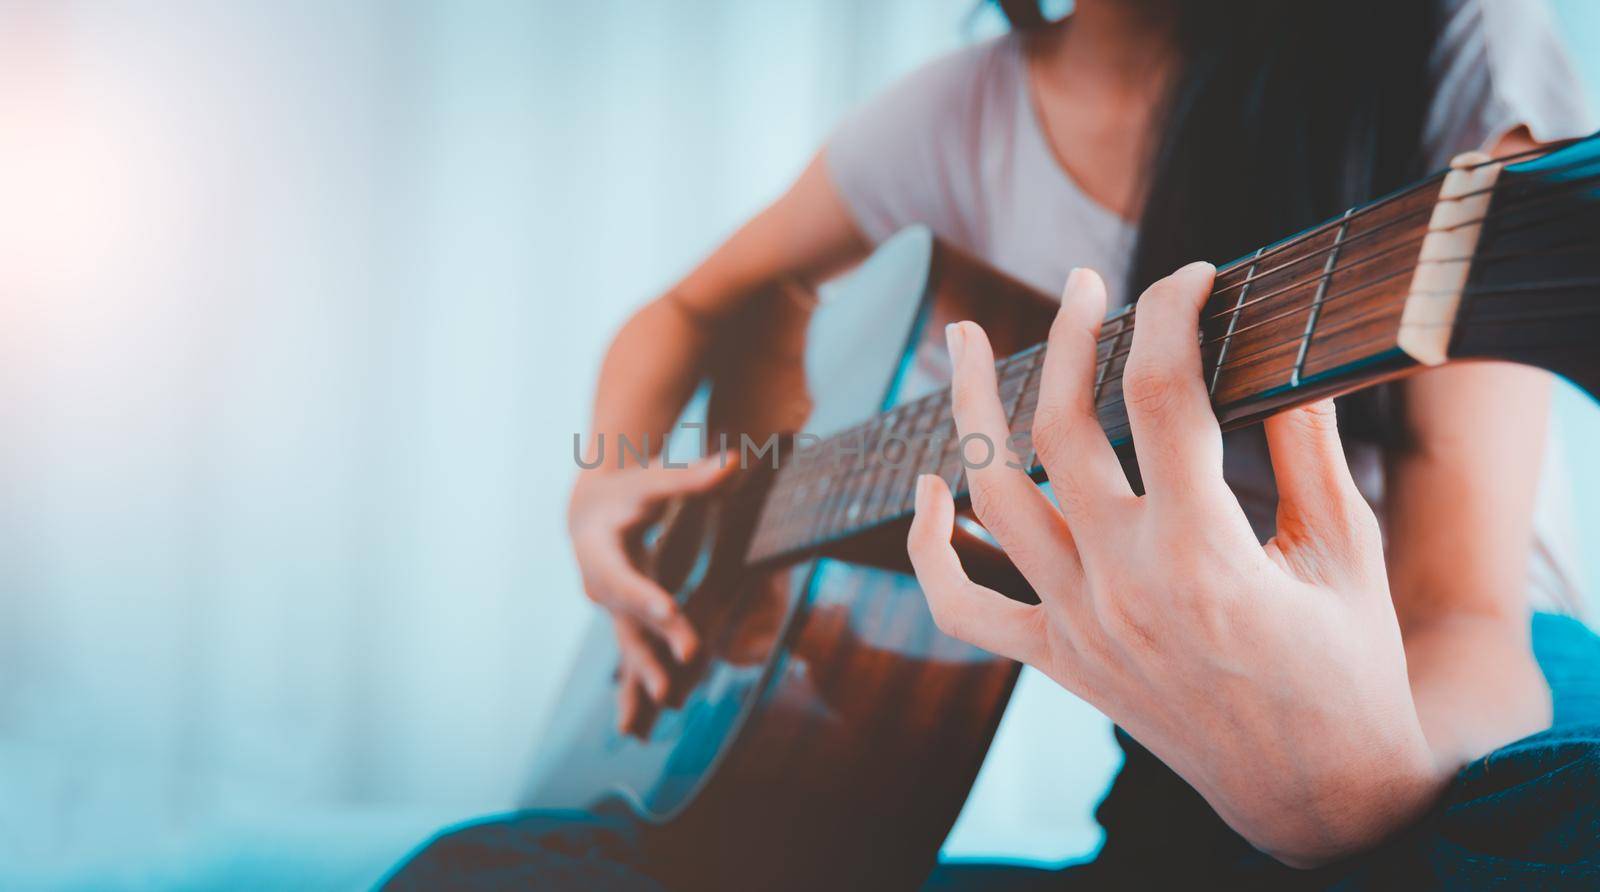 Woman playing guitar by Wasant